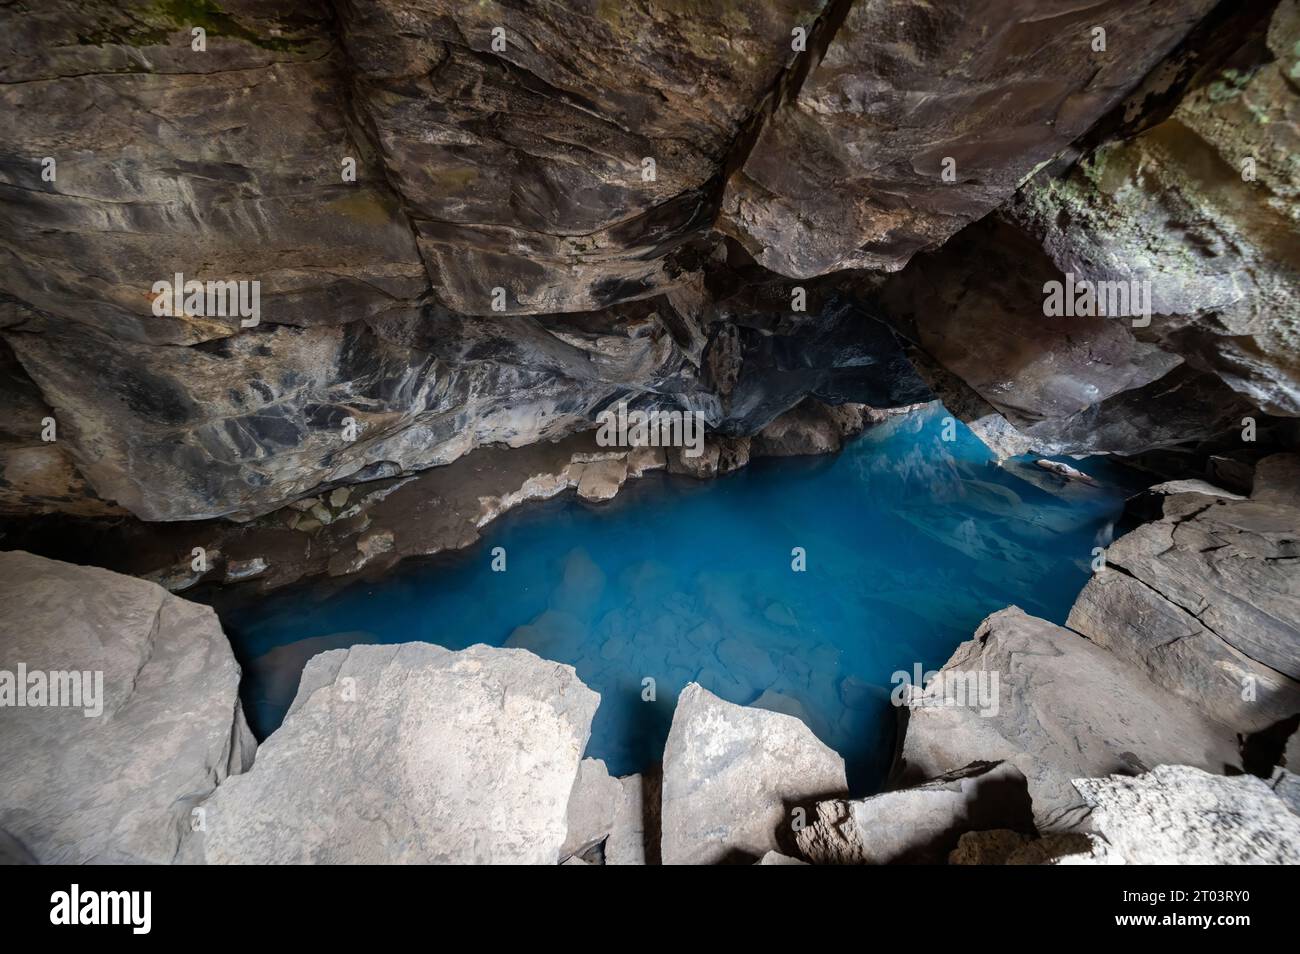 Blue pool in Grjotagja lava cave and fissure in Myvatn, Iceland under autumn afternoon cloudscape. Stock Photo